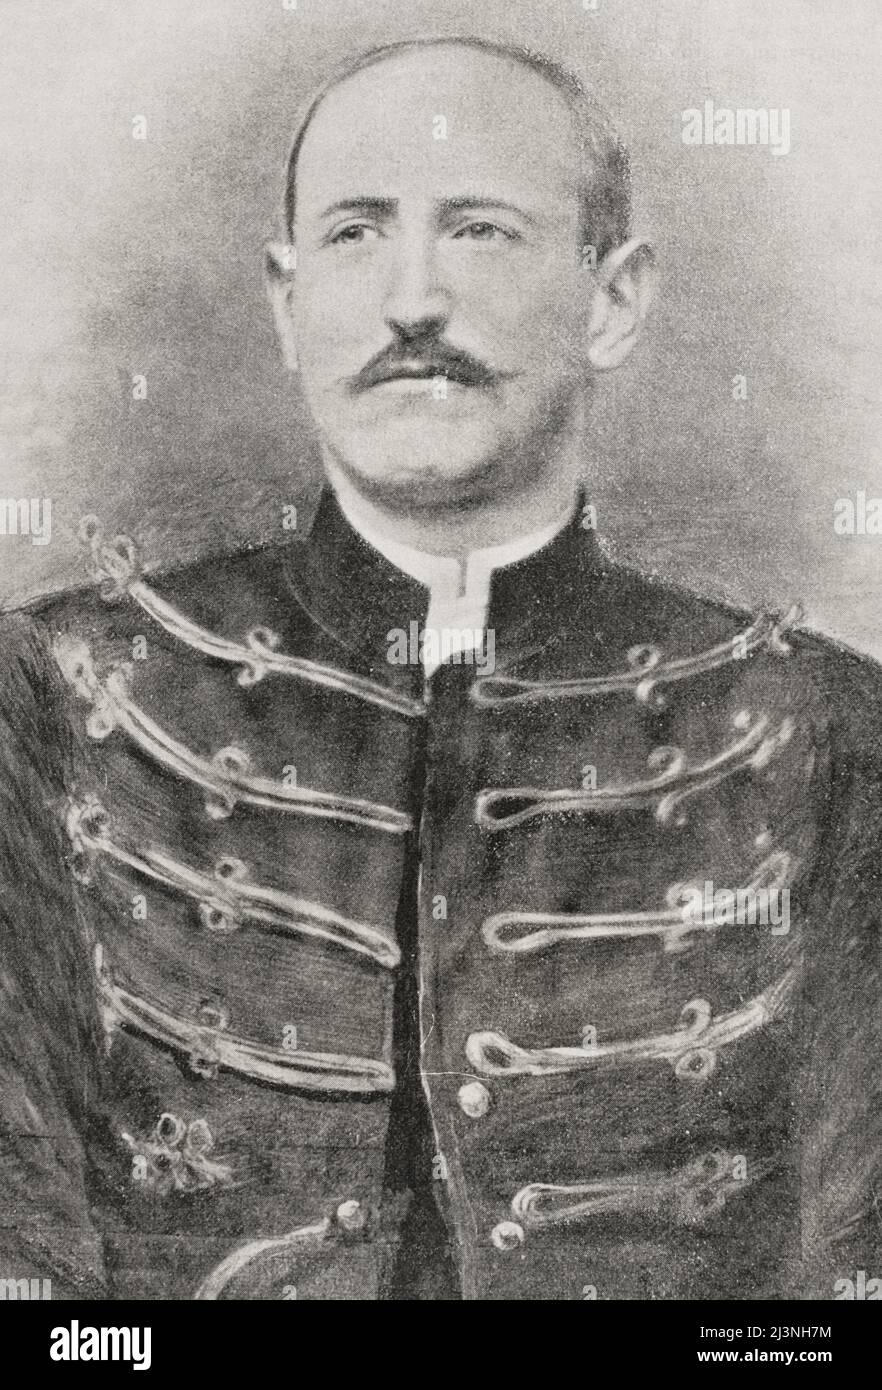 Alfred Dreyfus (1859-1935). French military officer. In 1894 he was charged with treason for passing on reports of military secrets to the German embassy in Paris. The trial, known as the Dreyfus Affair, had wide repercussions in French politics. Portrait obtained immediately after demotion. Photoengraving. La Ilustración Española y Americana, 1898. Stock Photo